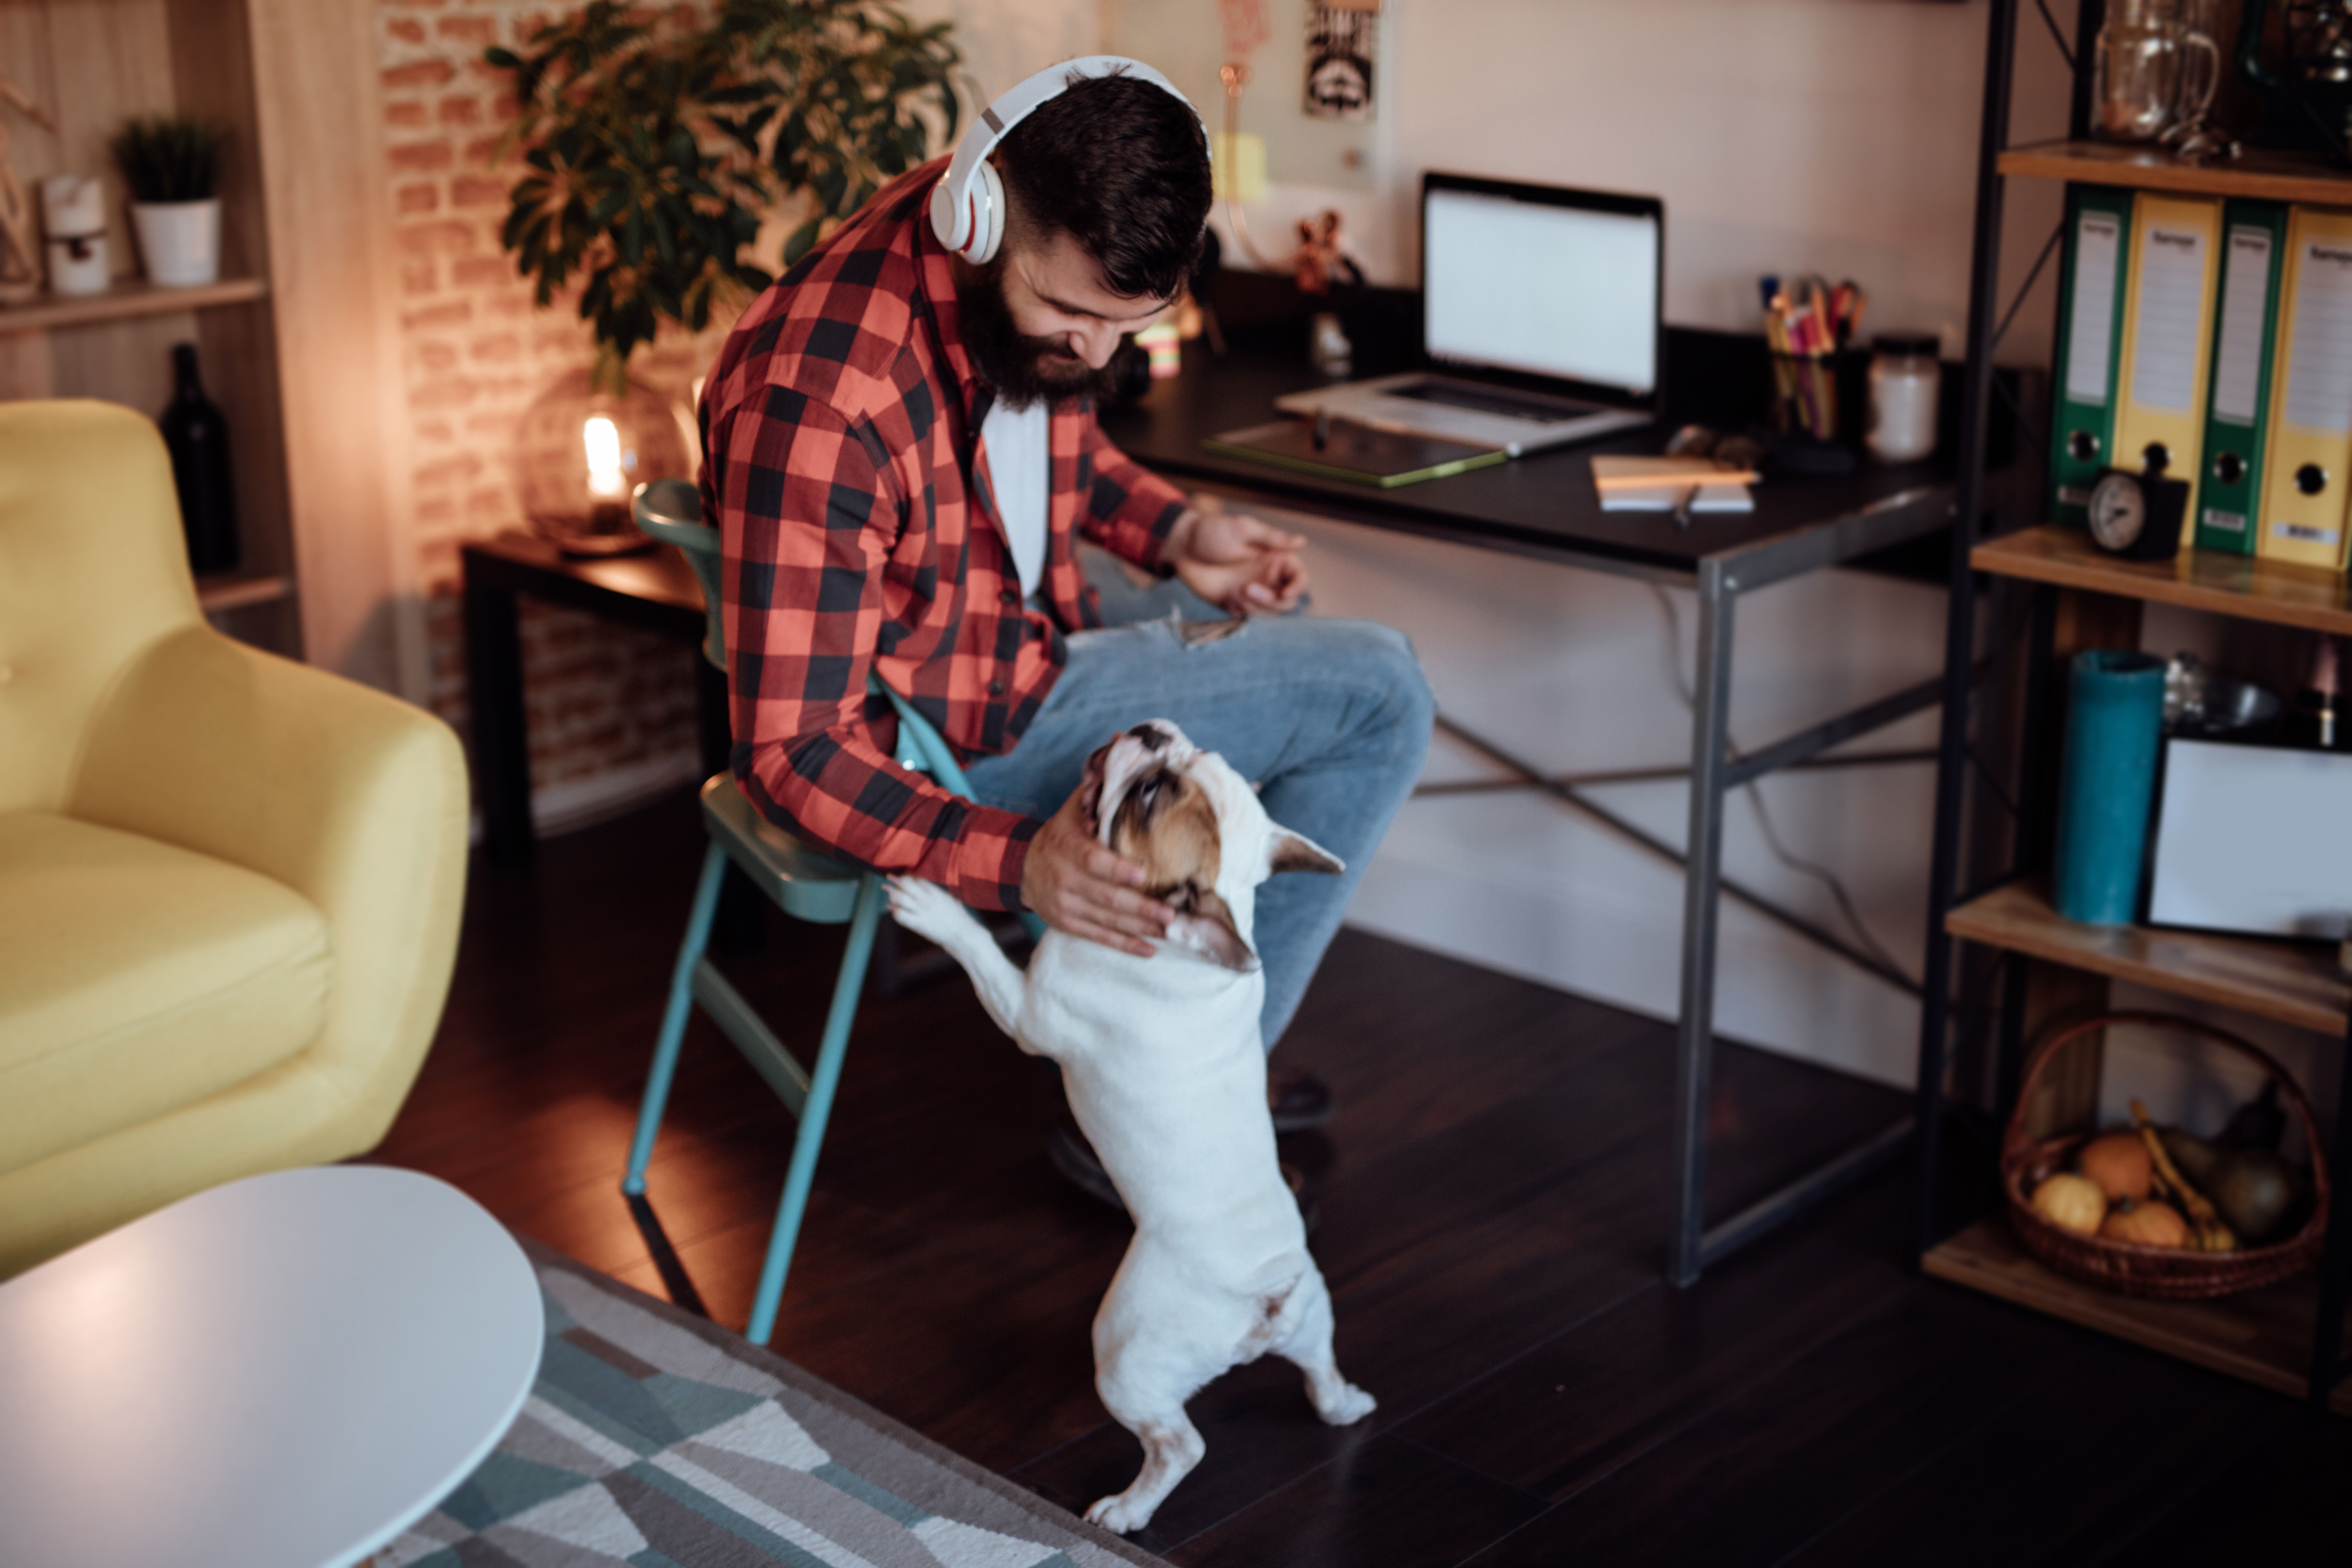 A person works from their laptop at home while playing with a pet dog.